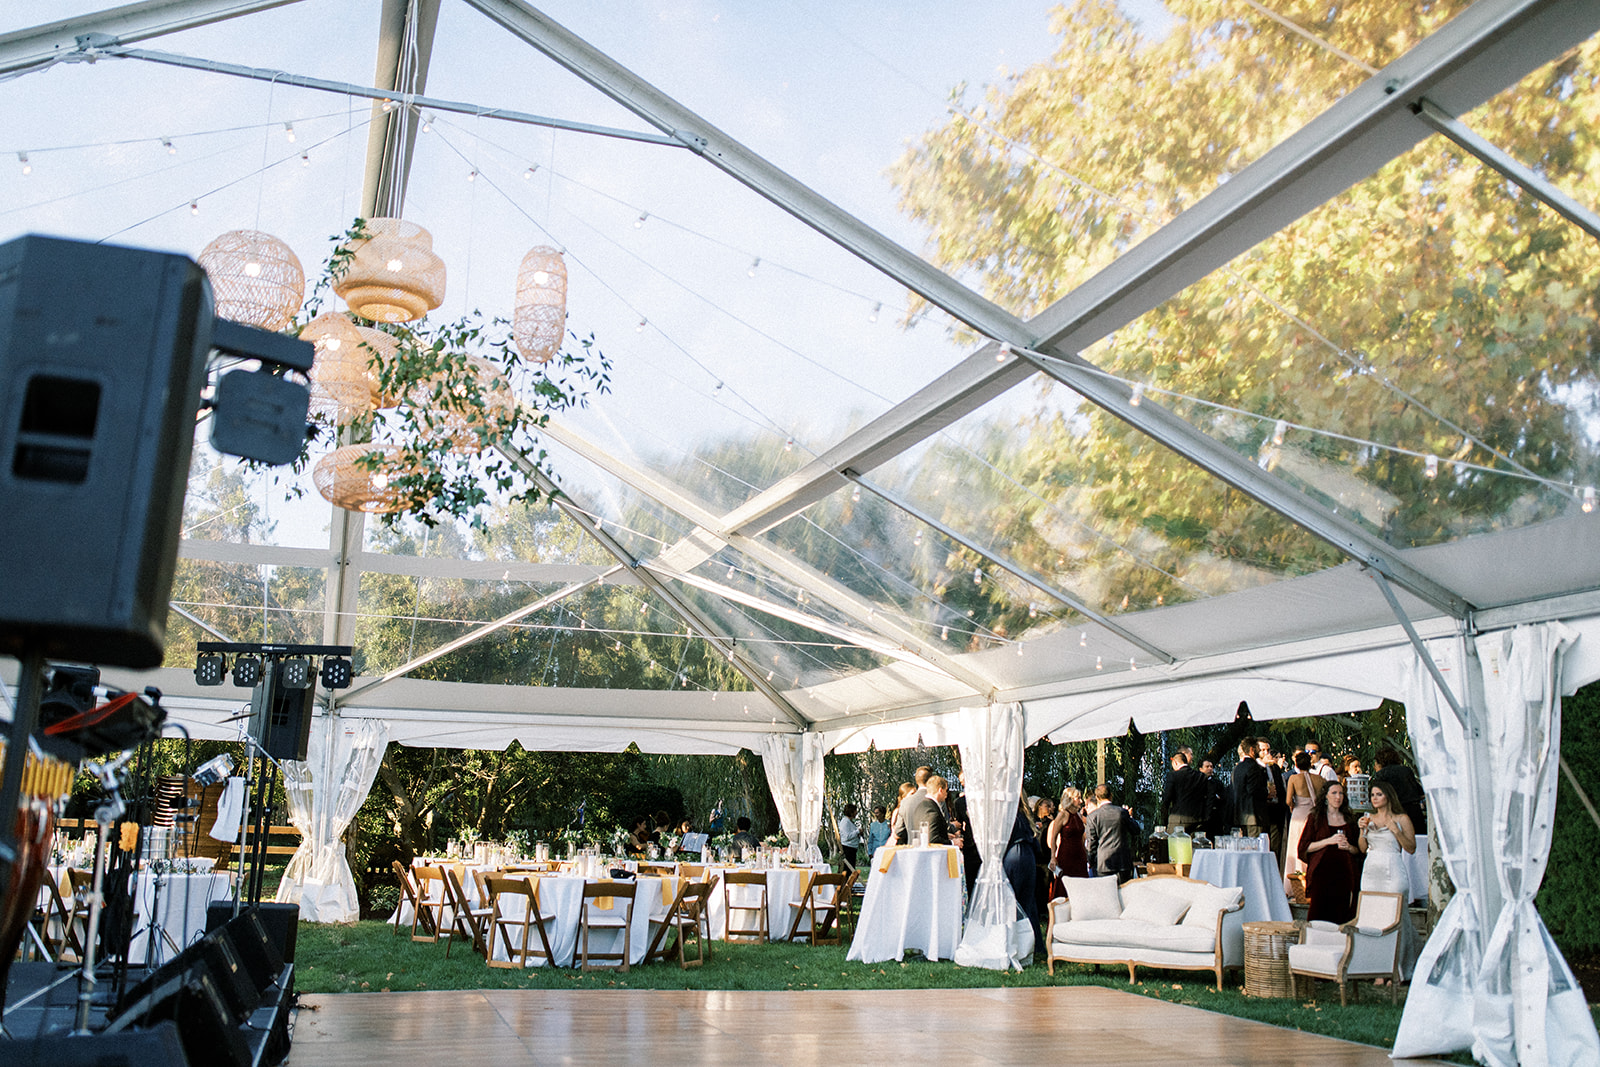 Clear Frame Tent over a wedding with a dancefloor and tables set up around